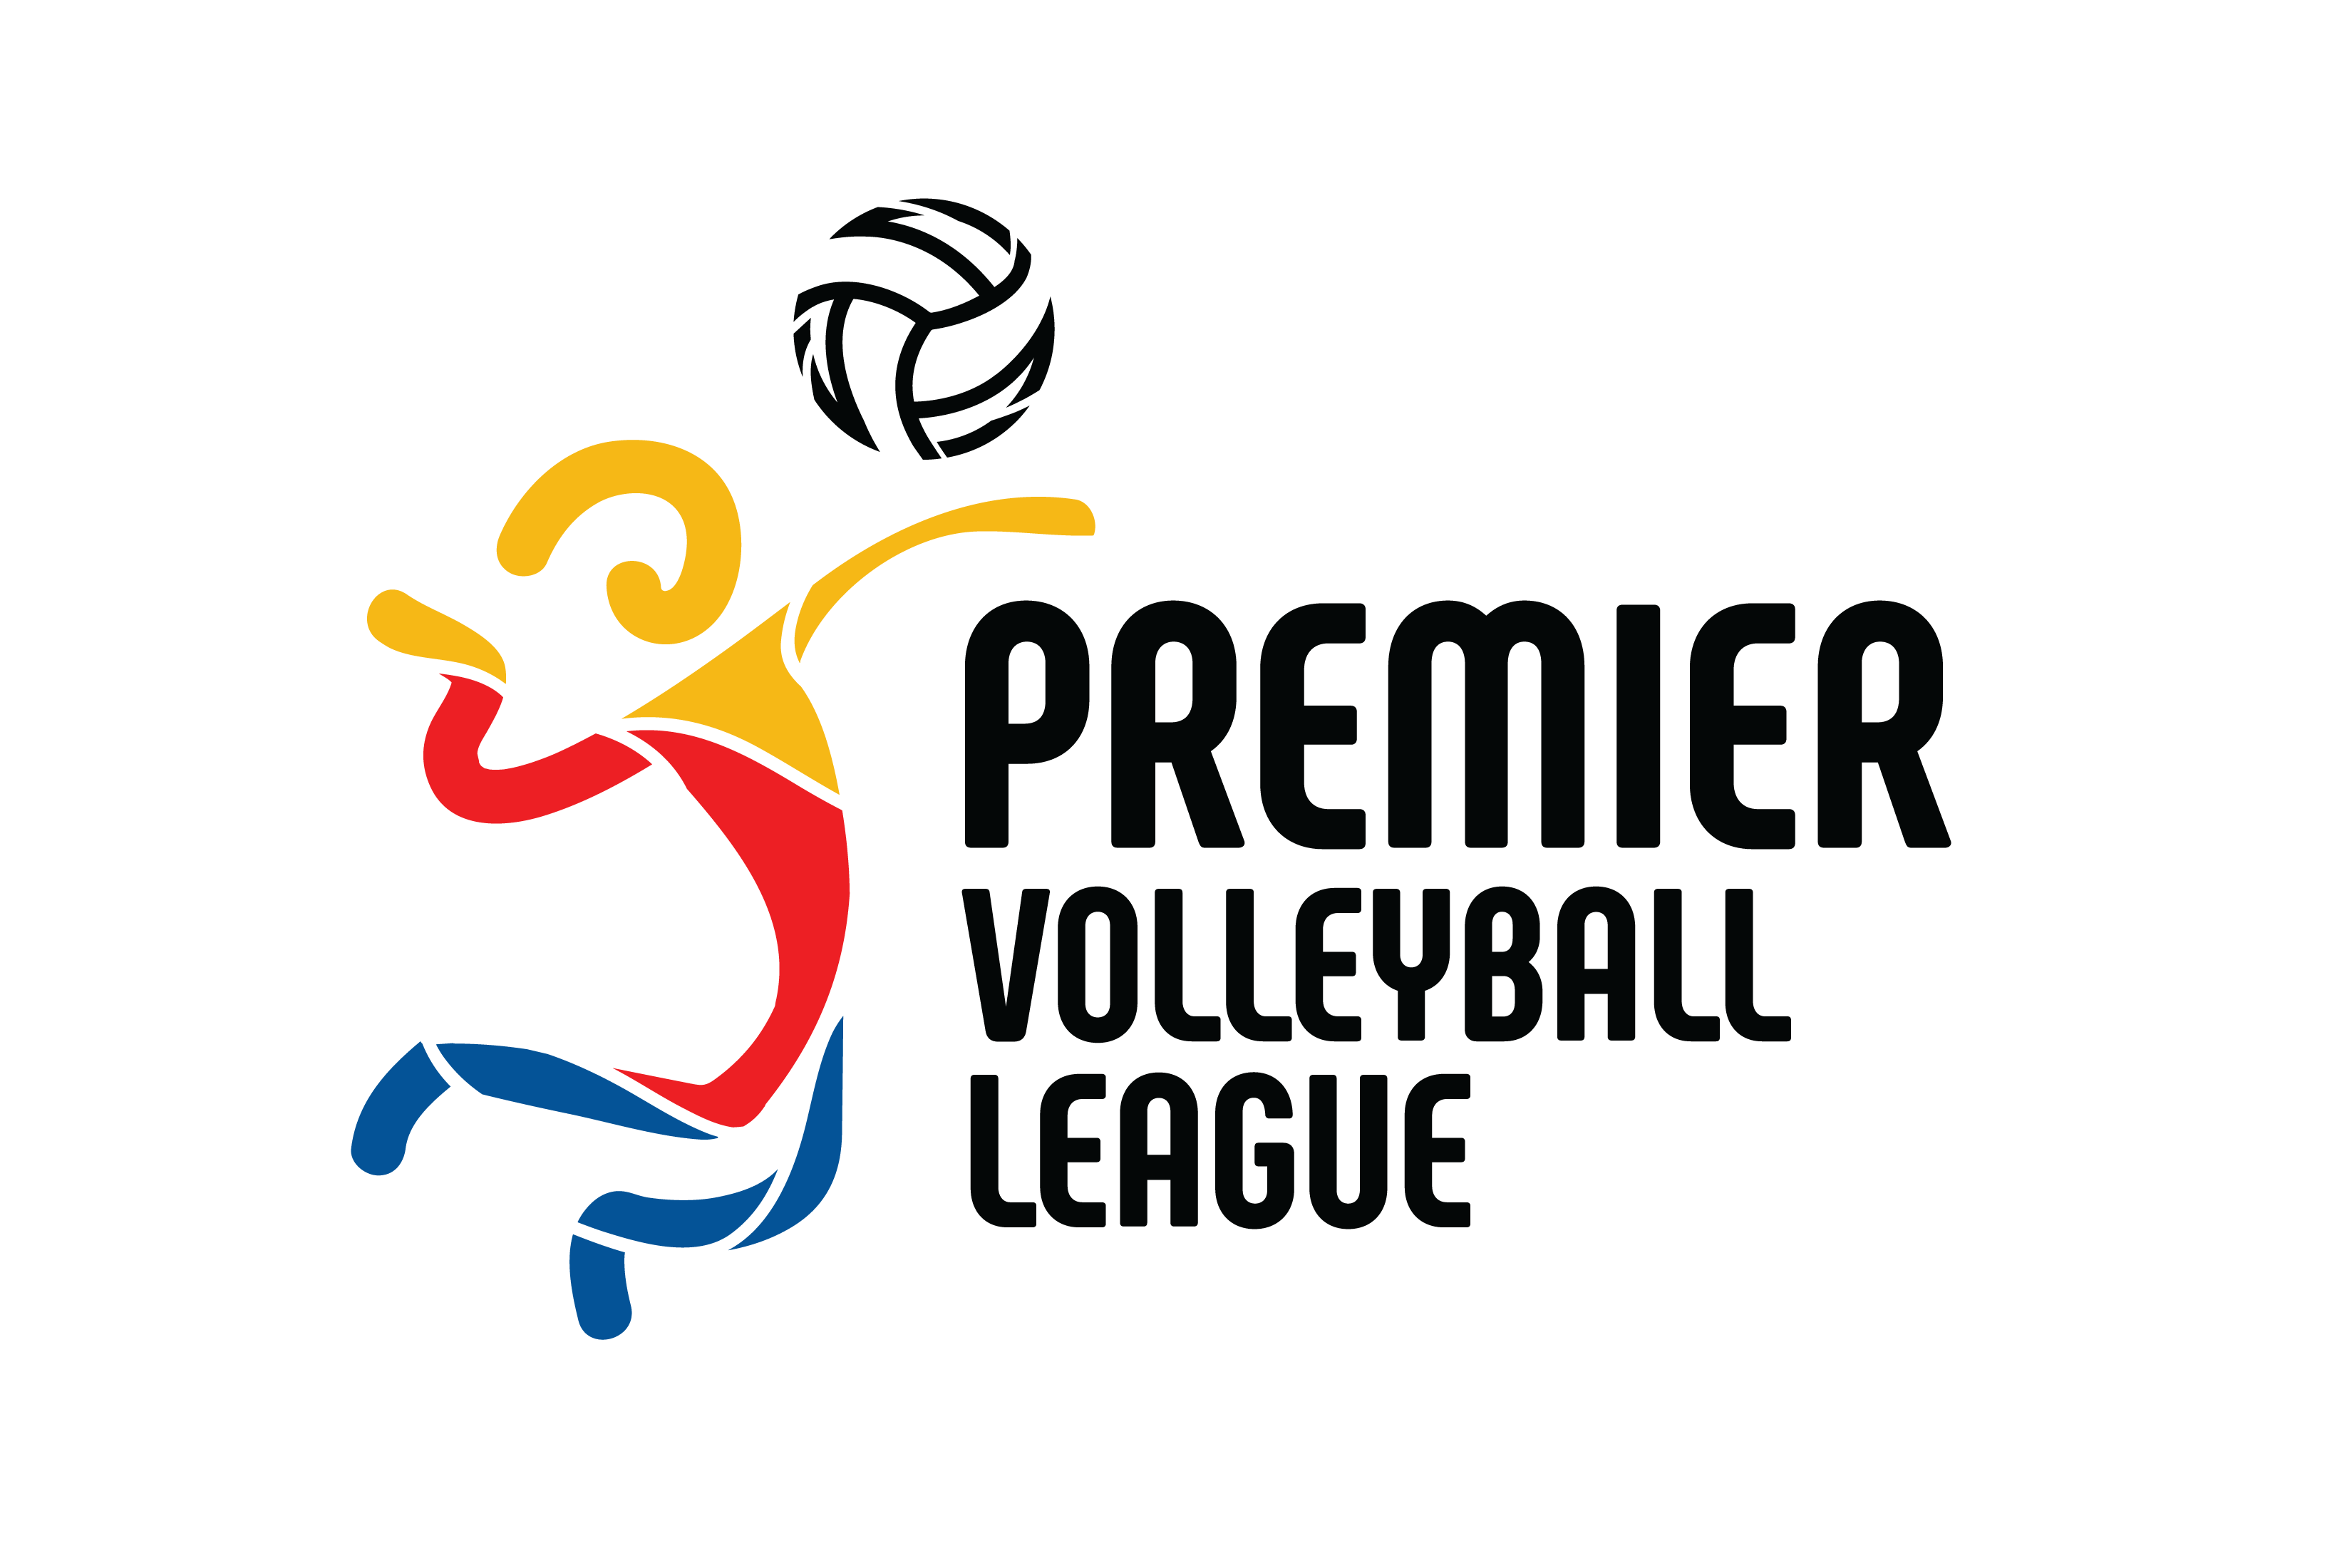 PVL heads to Tuguegarao for exhibition games